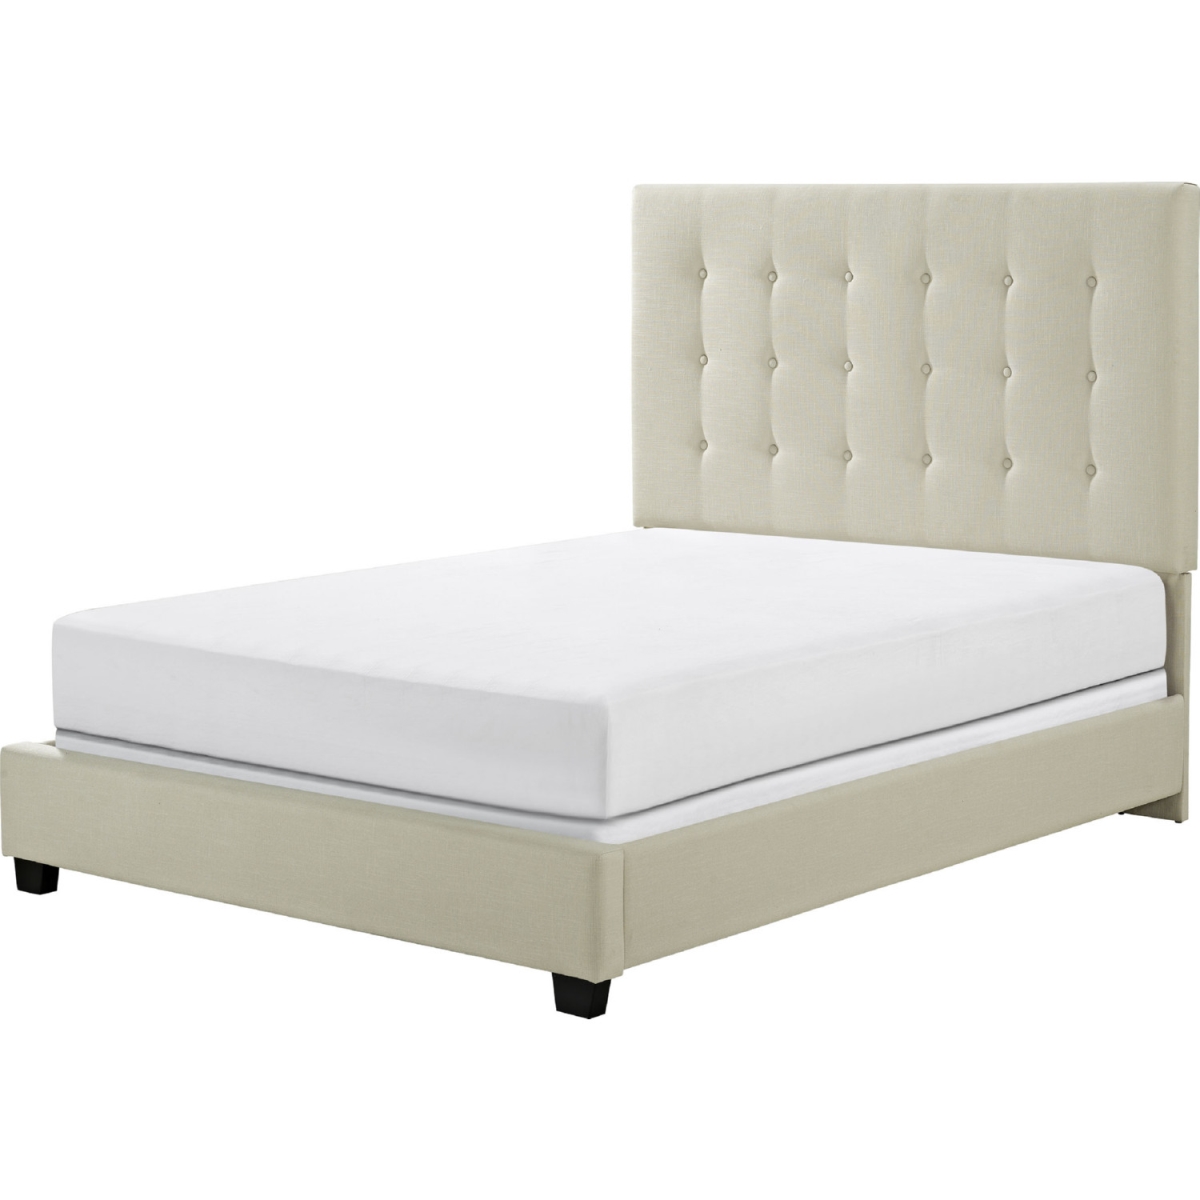 Reston Square Upholstered Queen Bedset, Creme Linen